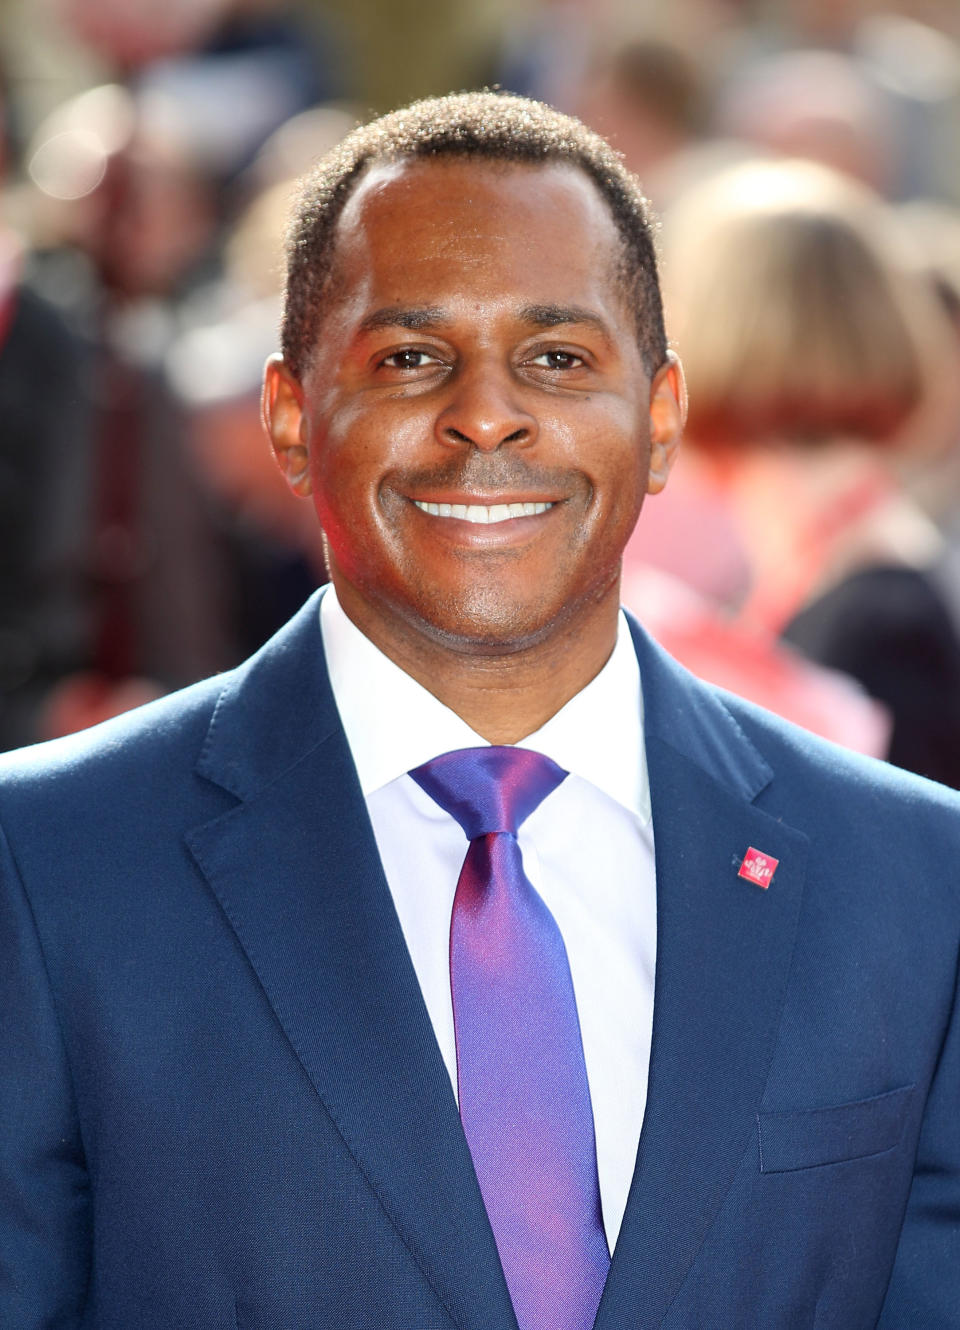 LONDON, ENGLAND - MARCH 12: Andi Peters attends The Prince's Trust Celebrate Success Awards at Odeon Leicester Square on March 12, 2015 in London, England.  (Photo by Mike Marsland/WireImage)